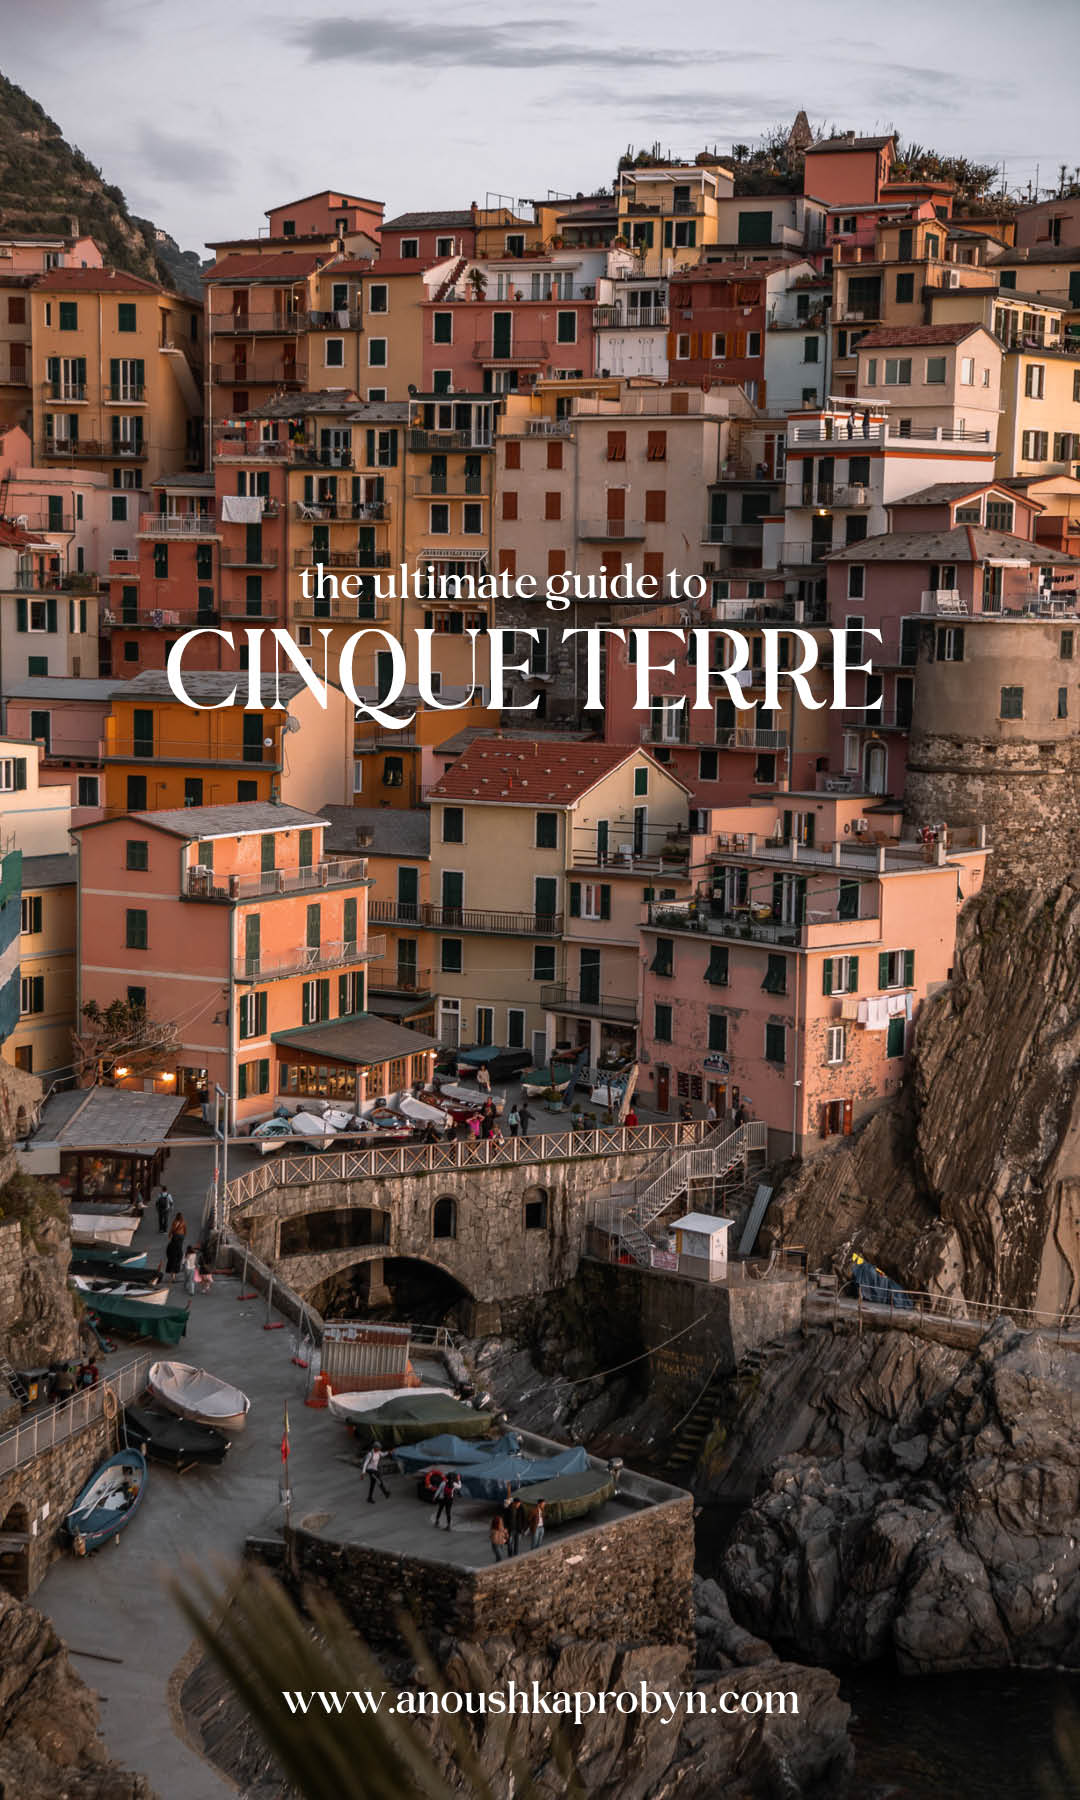 Cinque Terre Travel Guide Things to do in Cinque Terre Italy Liguria Pinterest Image